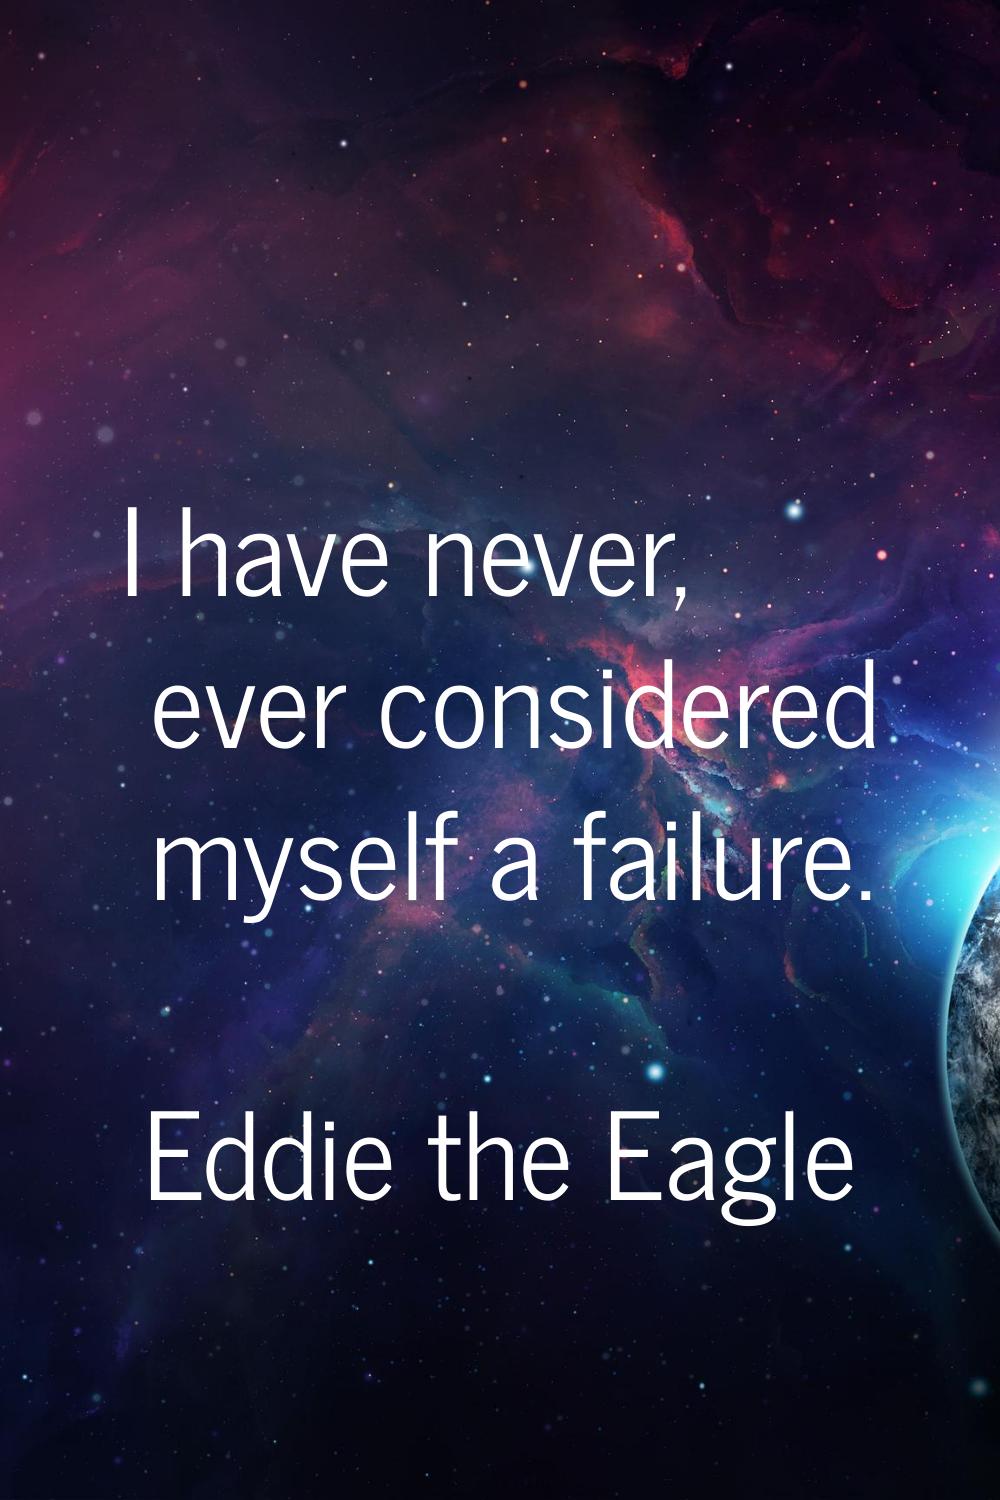 I have never, ever considered myself a failure.